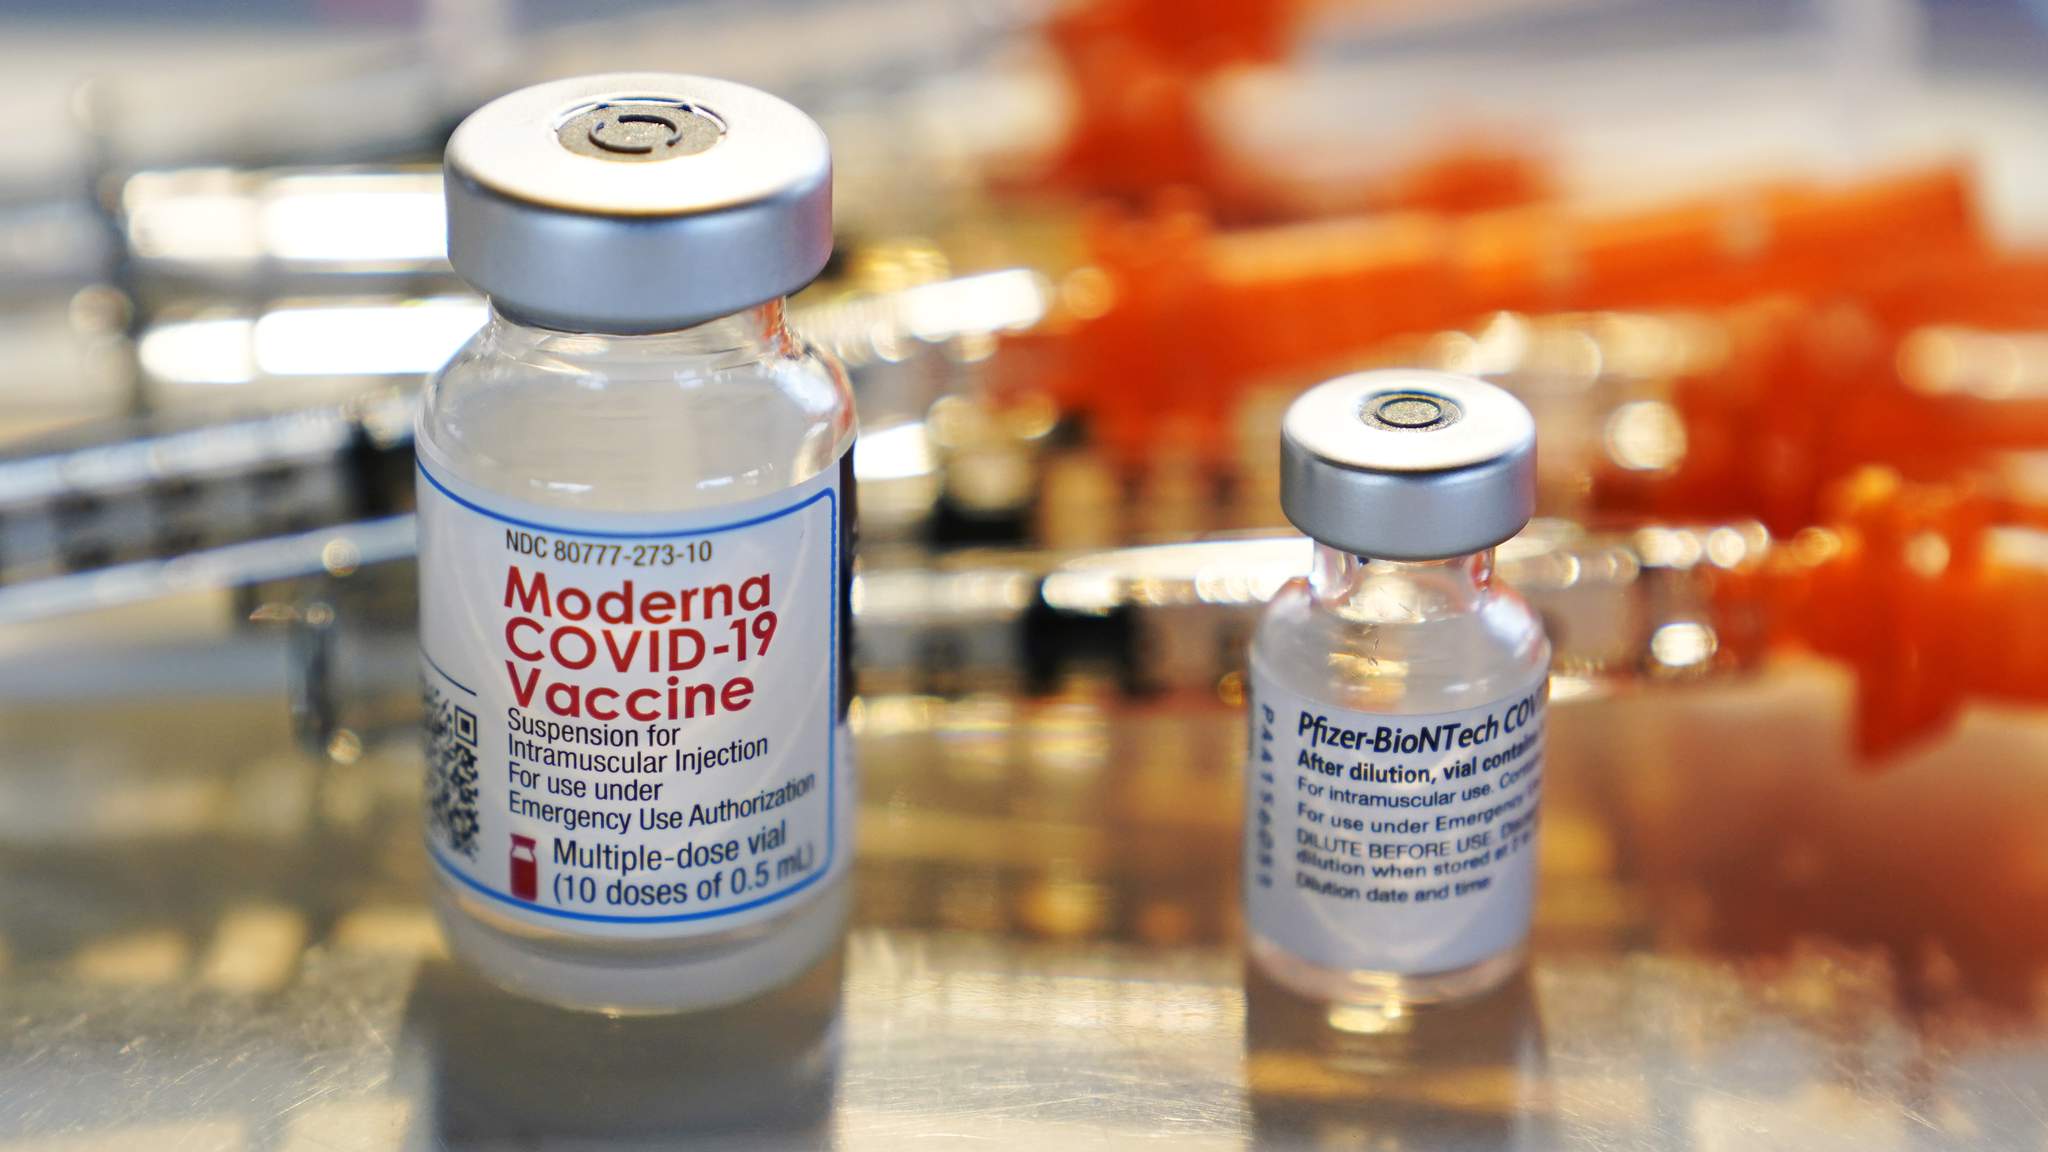 More than 900,000 first doses of COVID-19 vaccine arrive in Texas this week